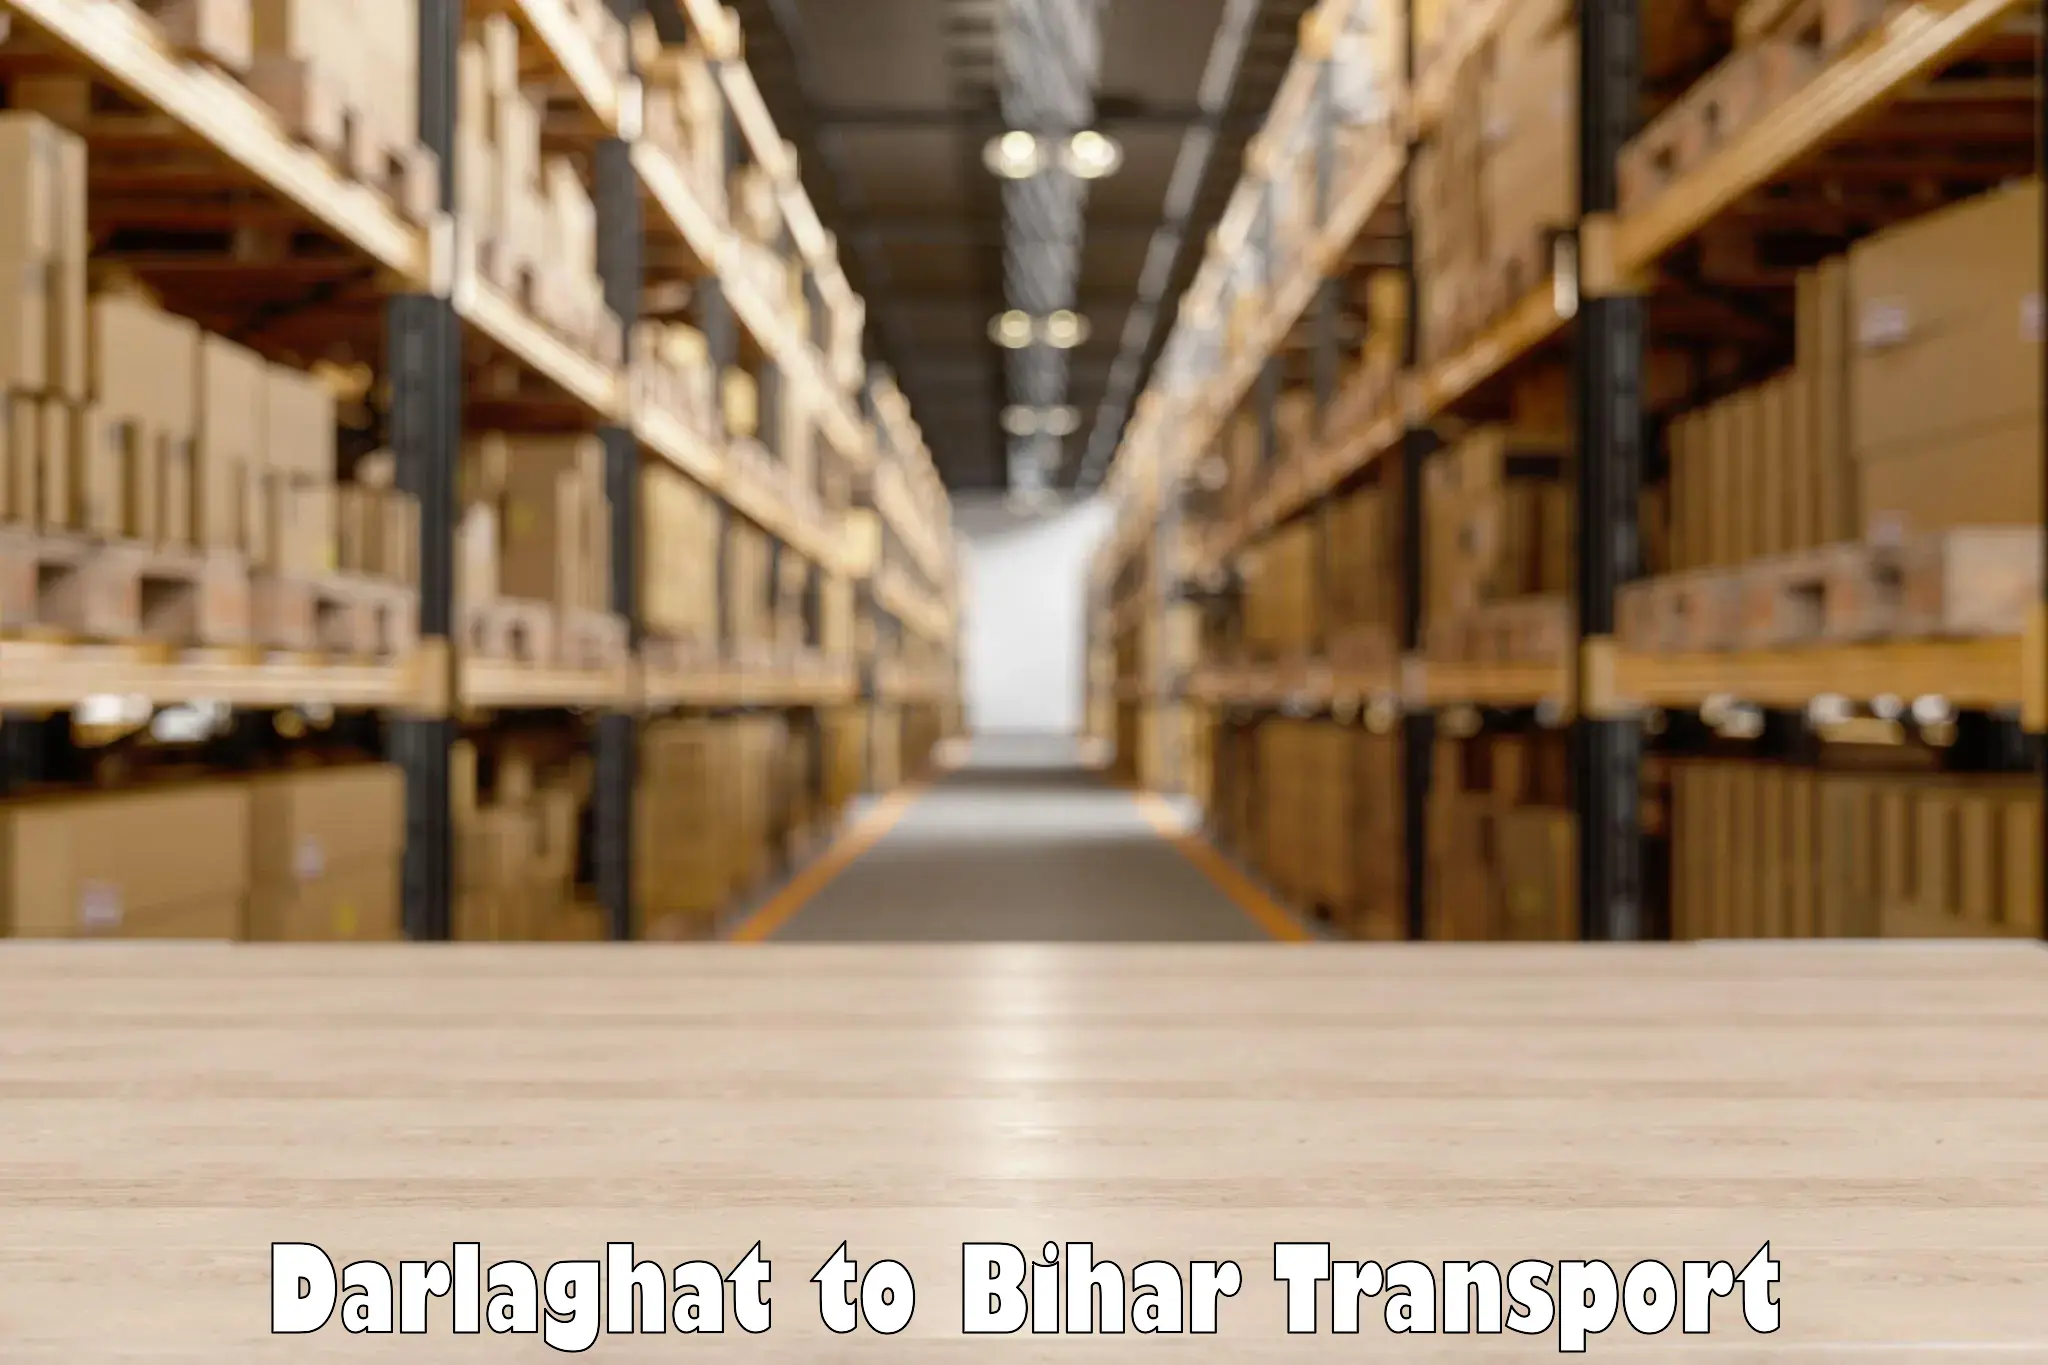 Transport shared services Darlaghat to Baisi